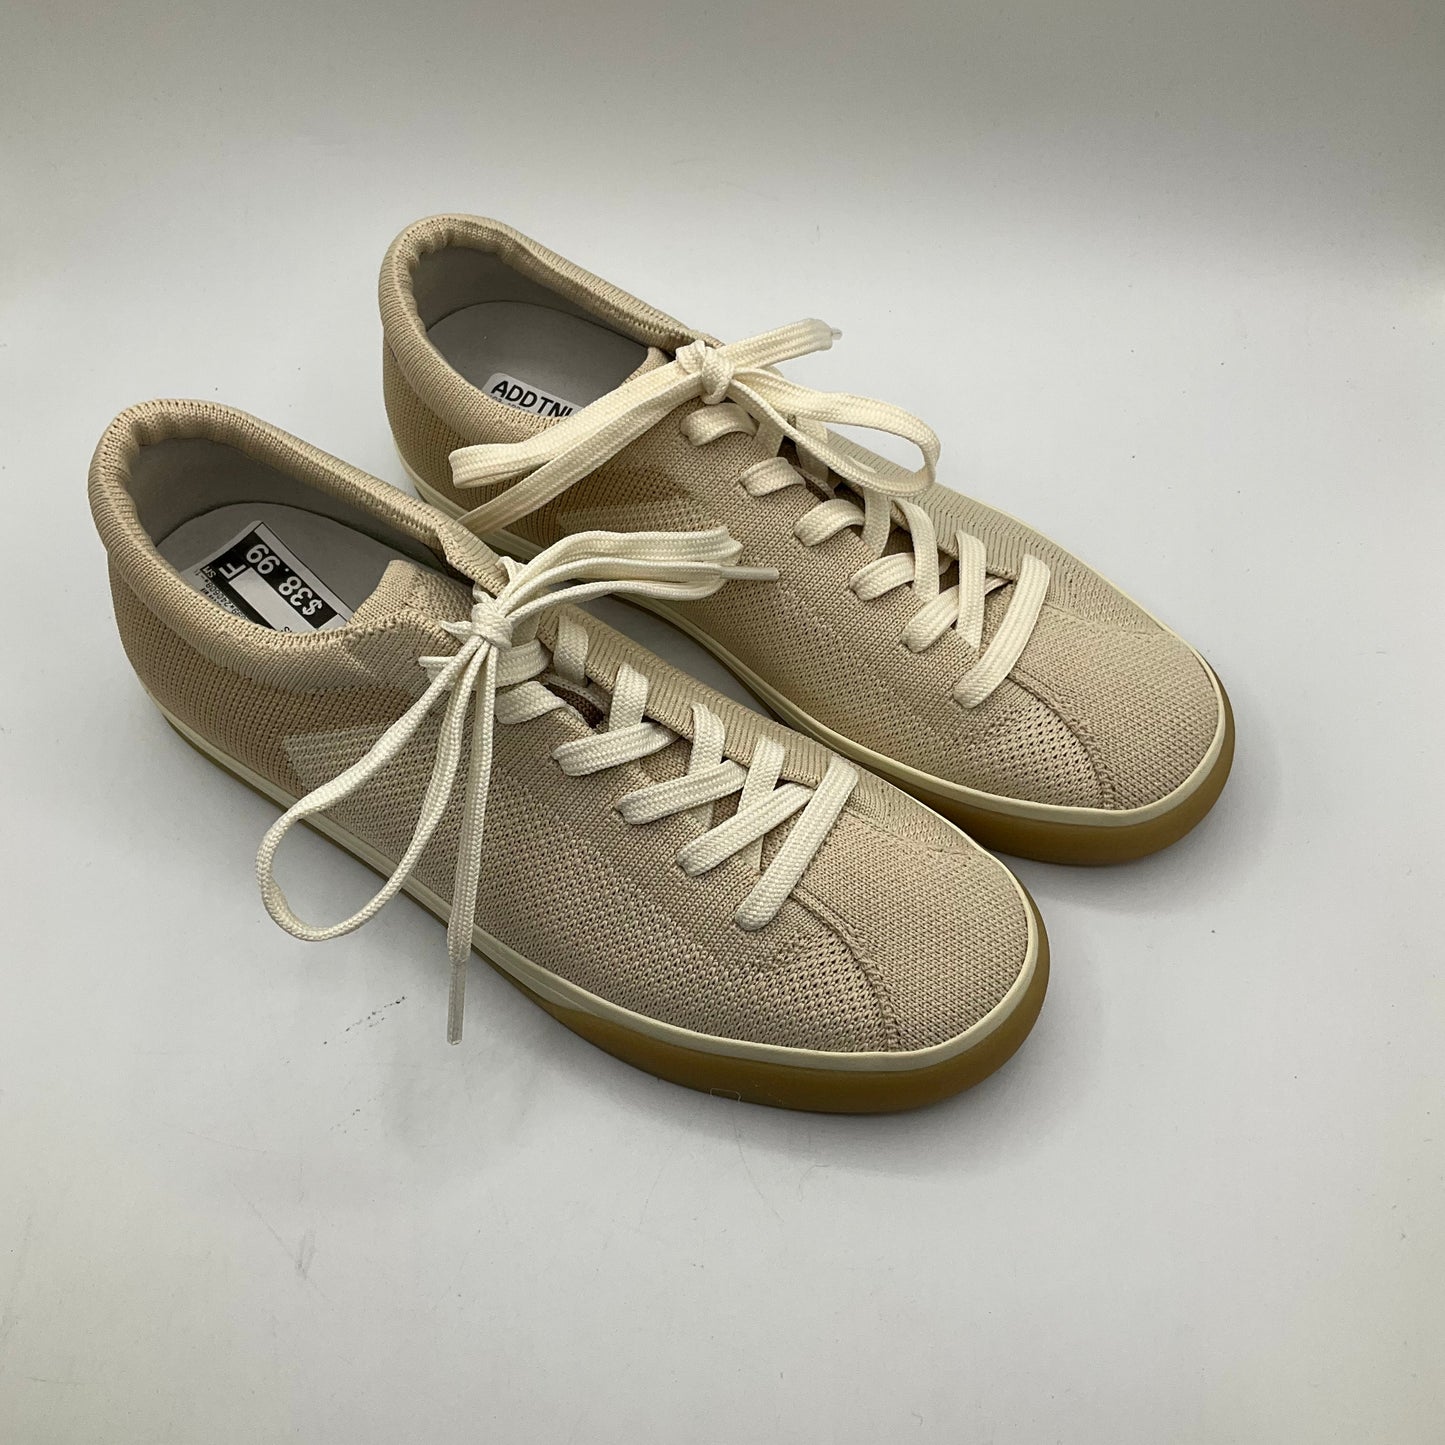 Beige Shoes Sneakers Rothys, Size 7.5